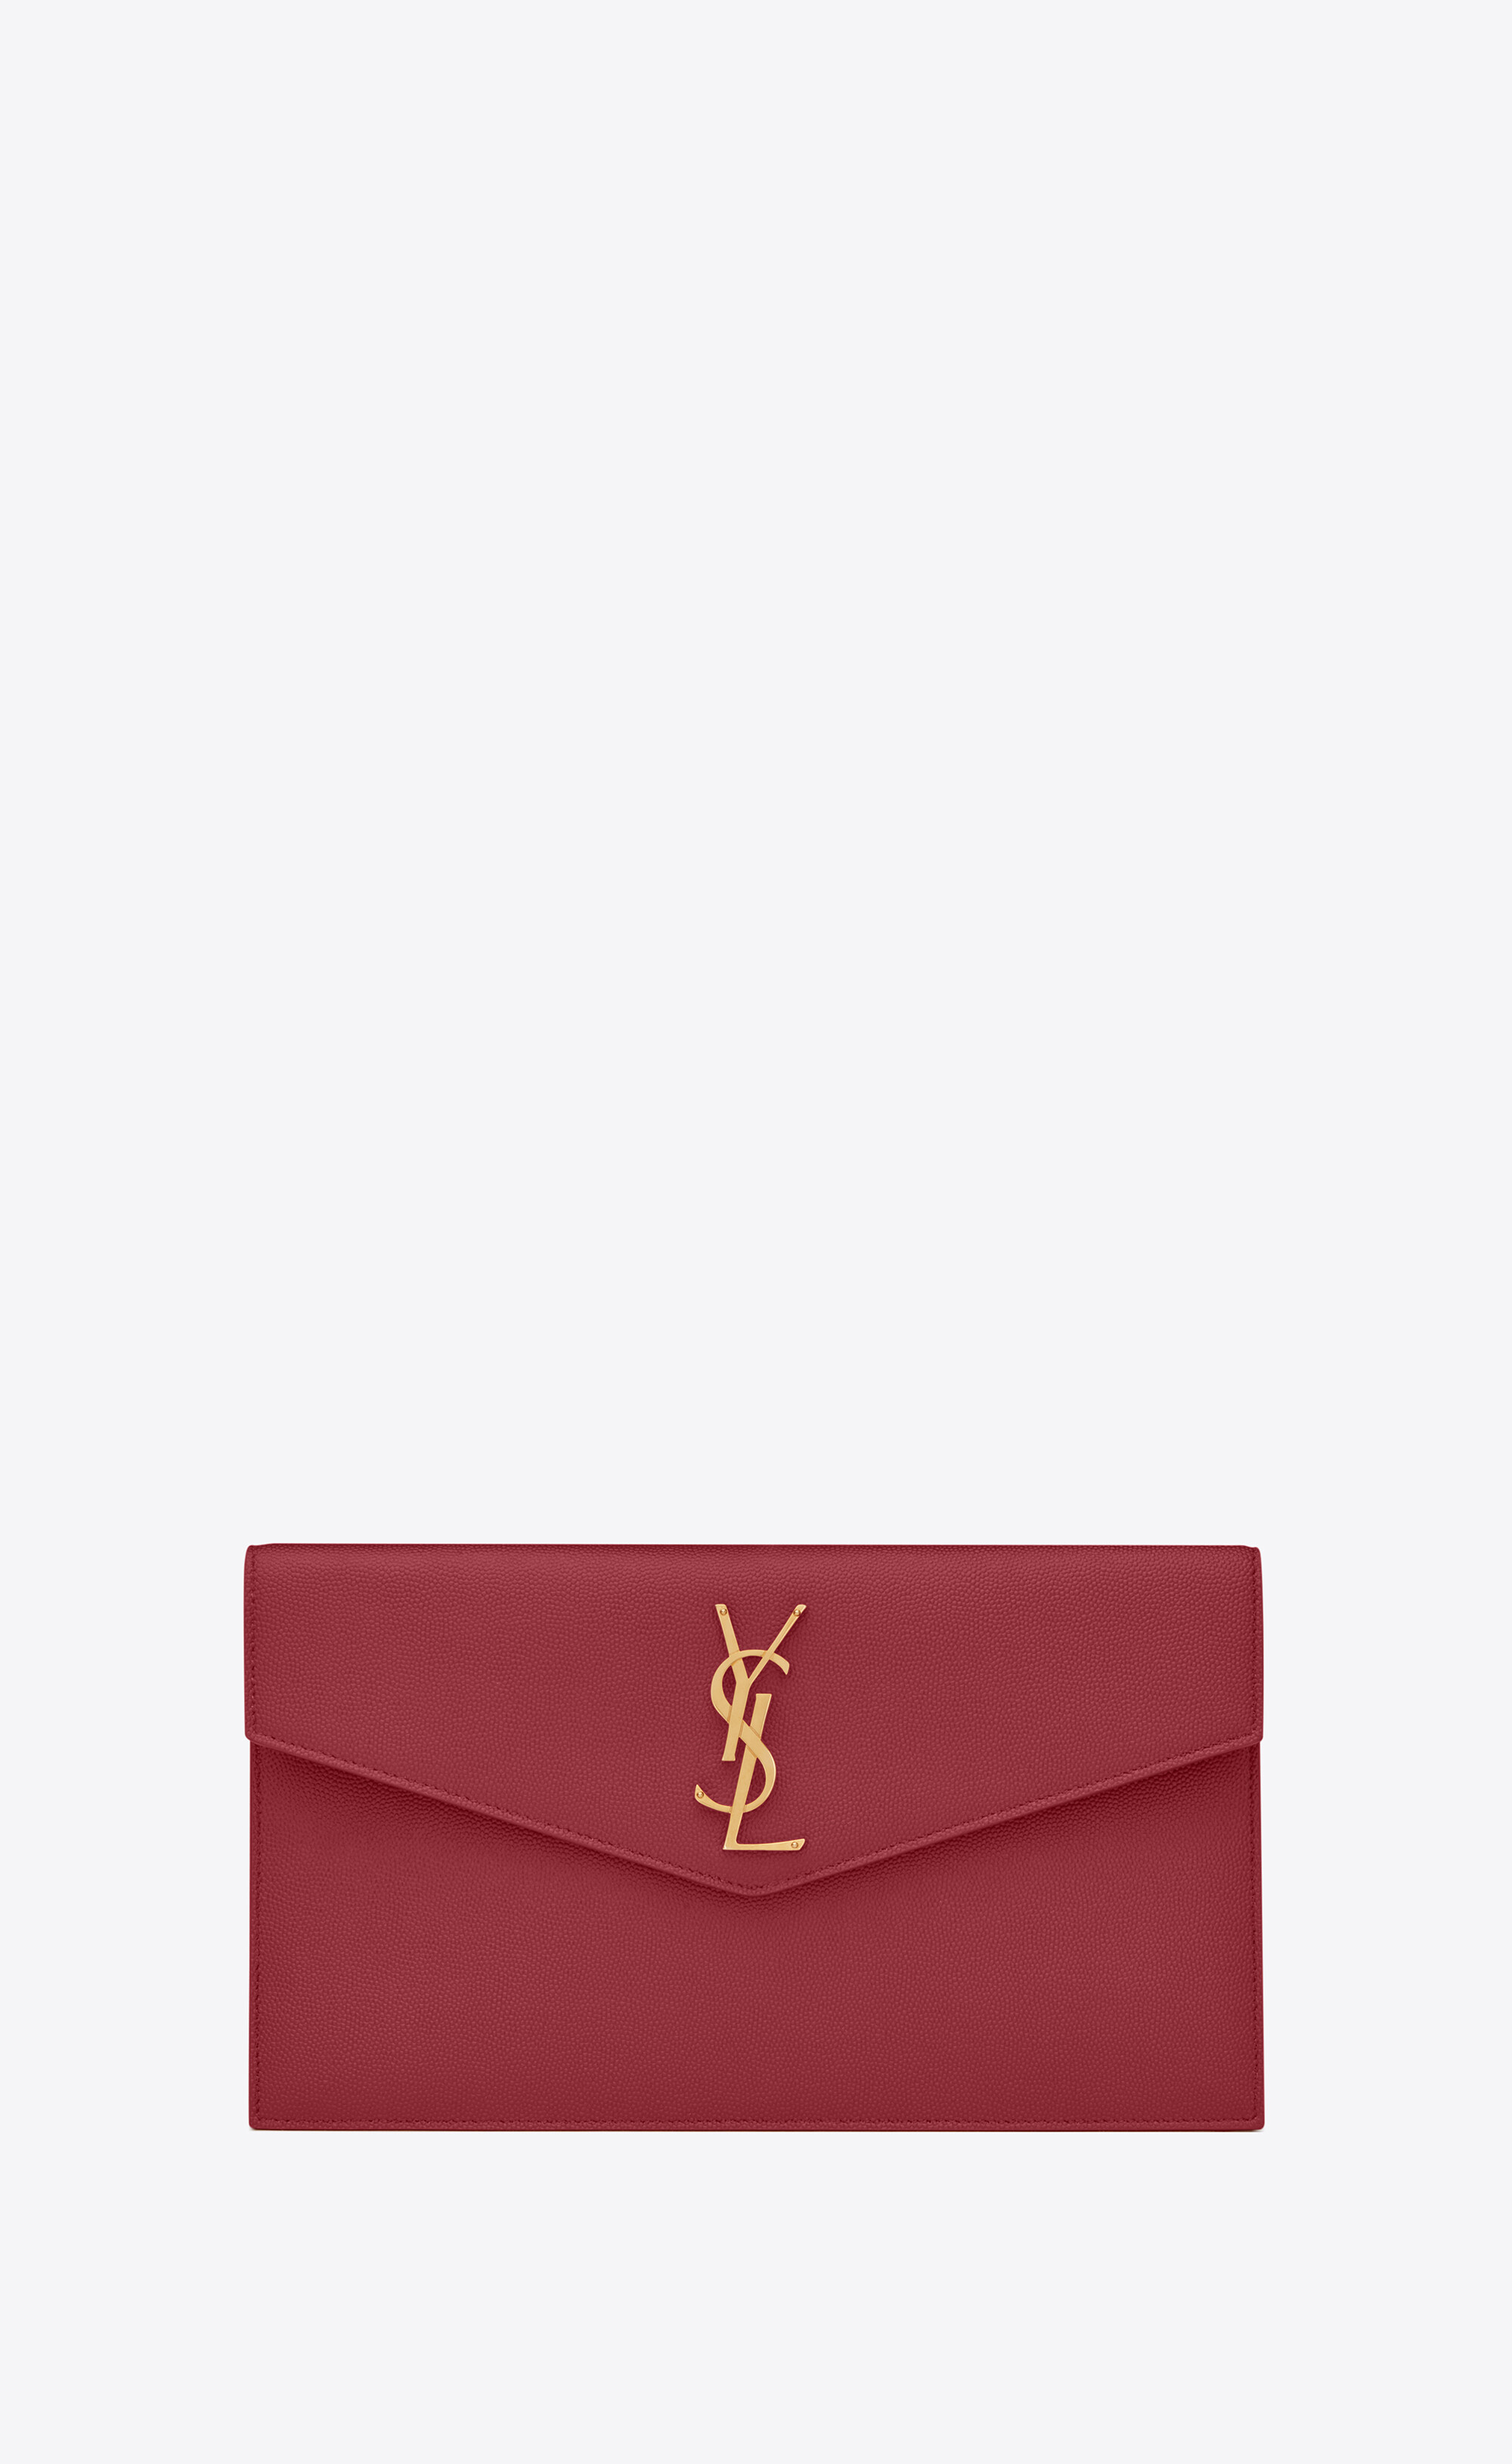 YSL Uptown Pouch - With Grommets - SLG Organizer